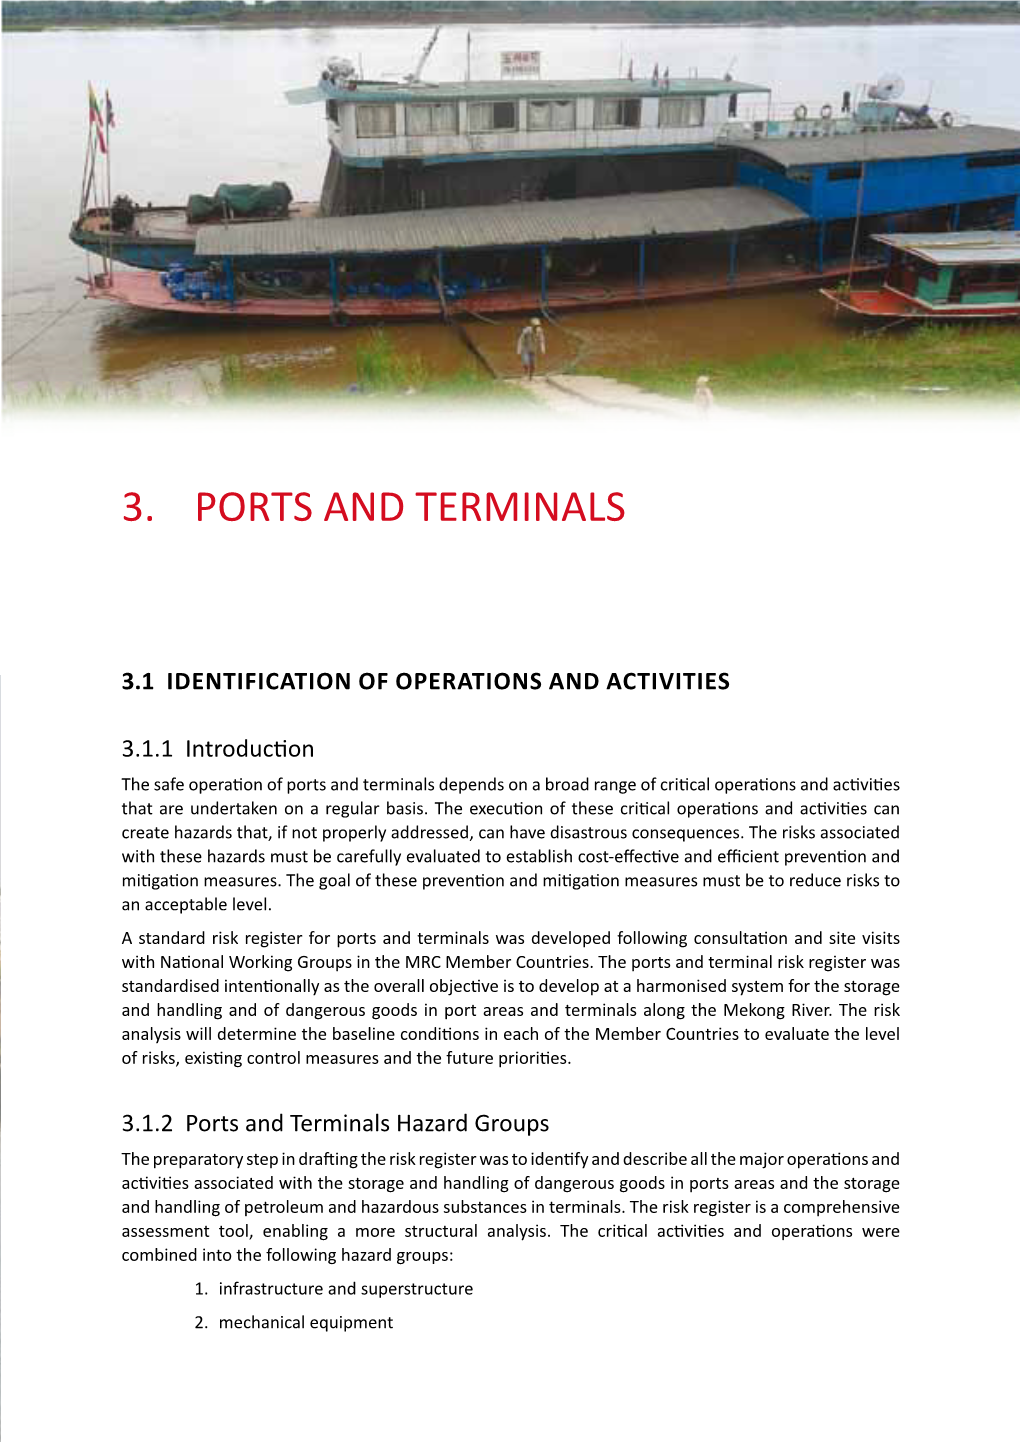 3. PORTS and TERMINALS